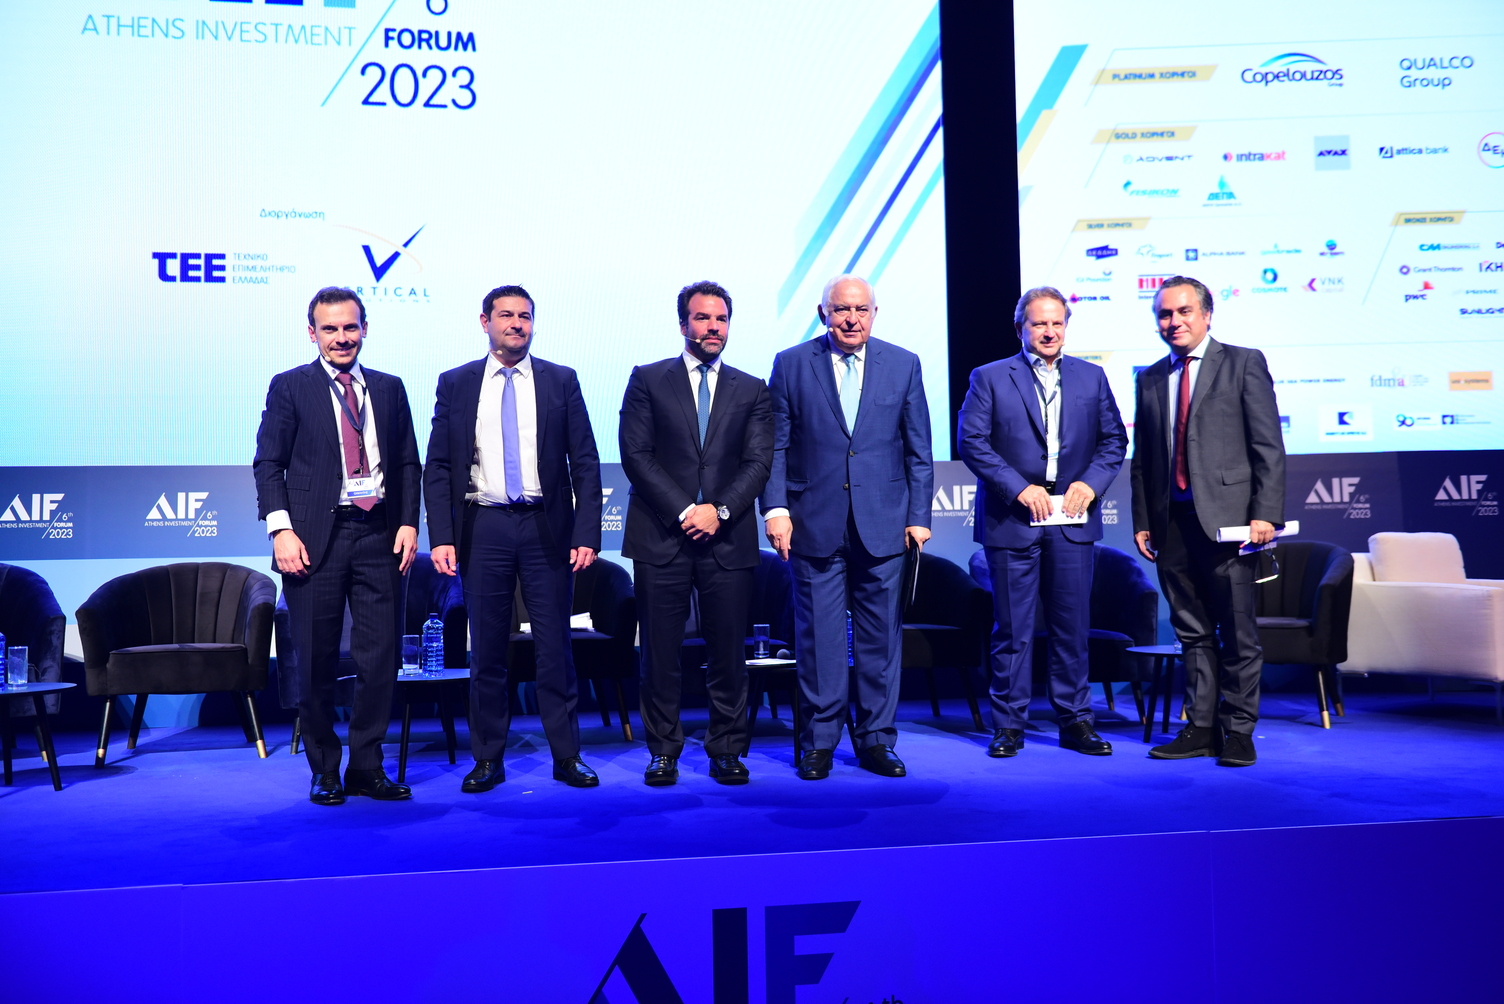 © 6th Athens Investment Forum